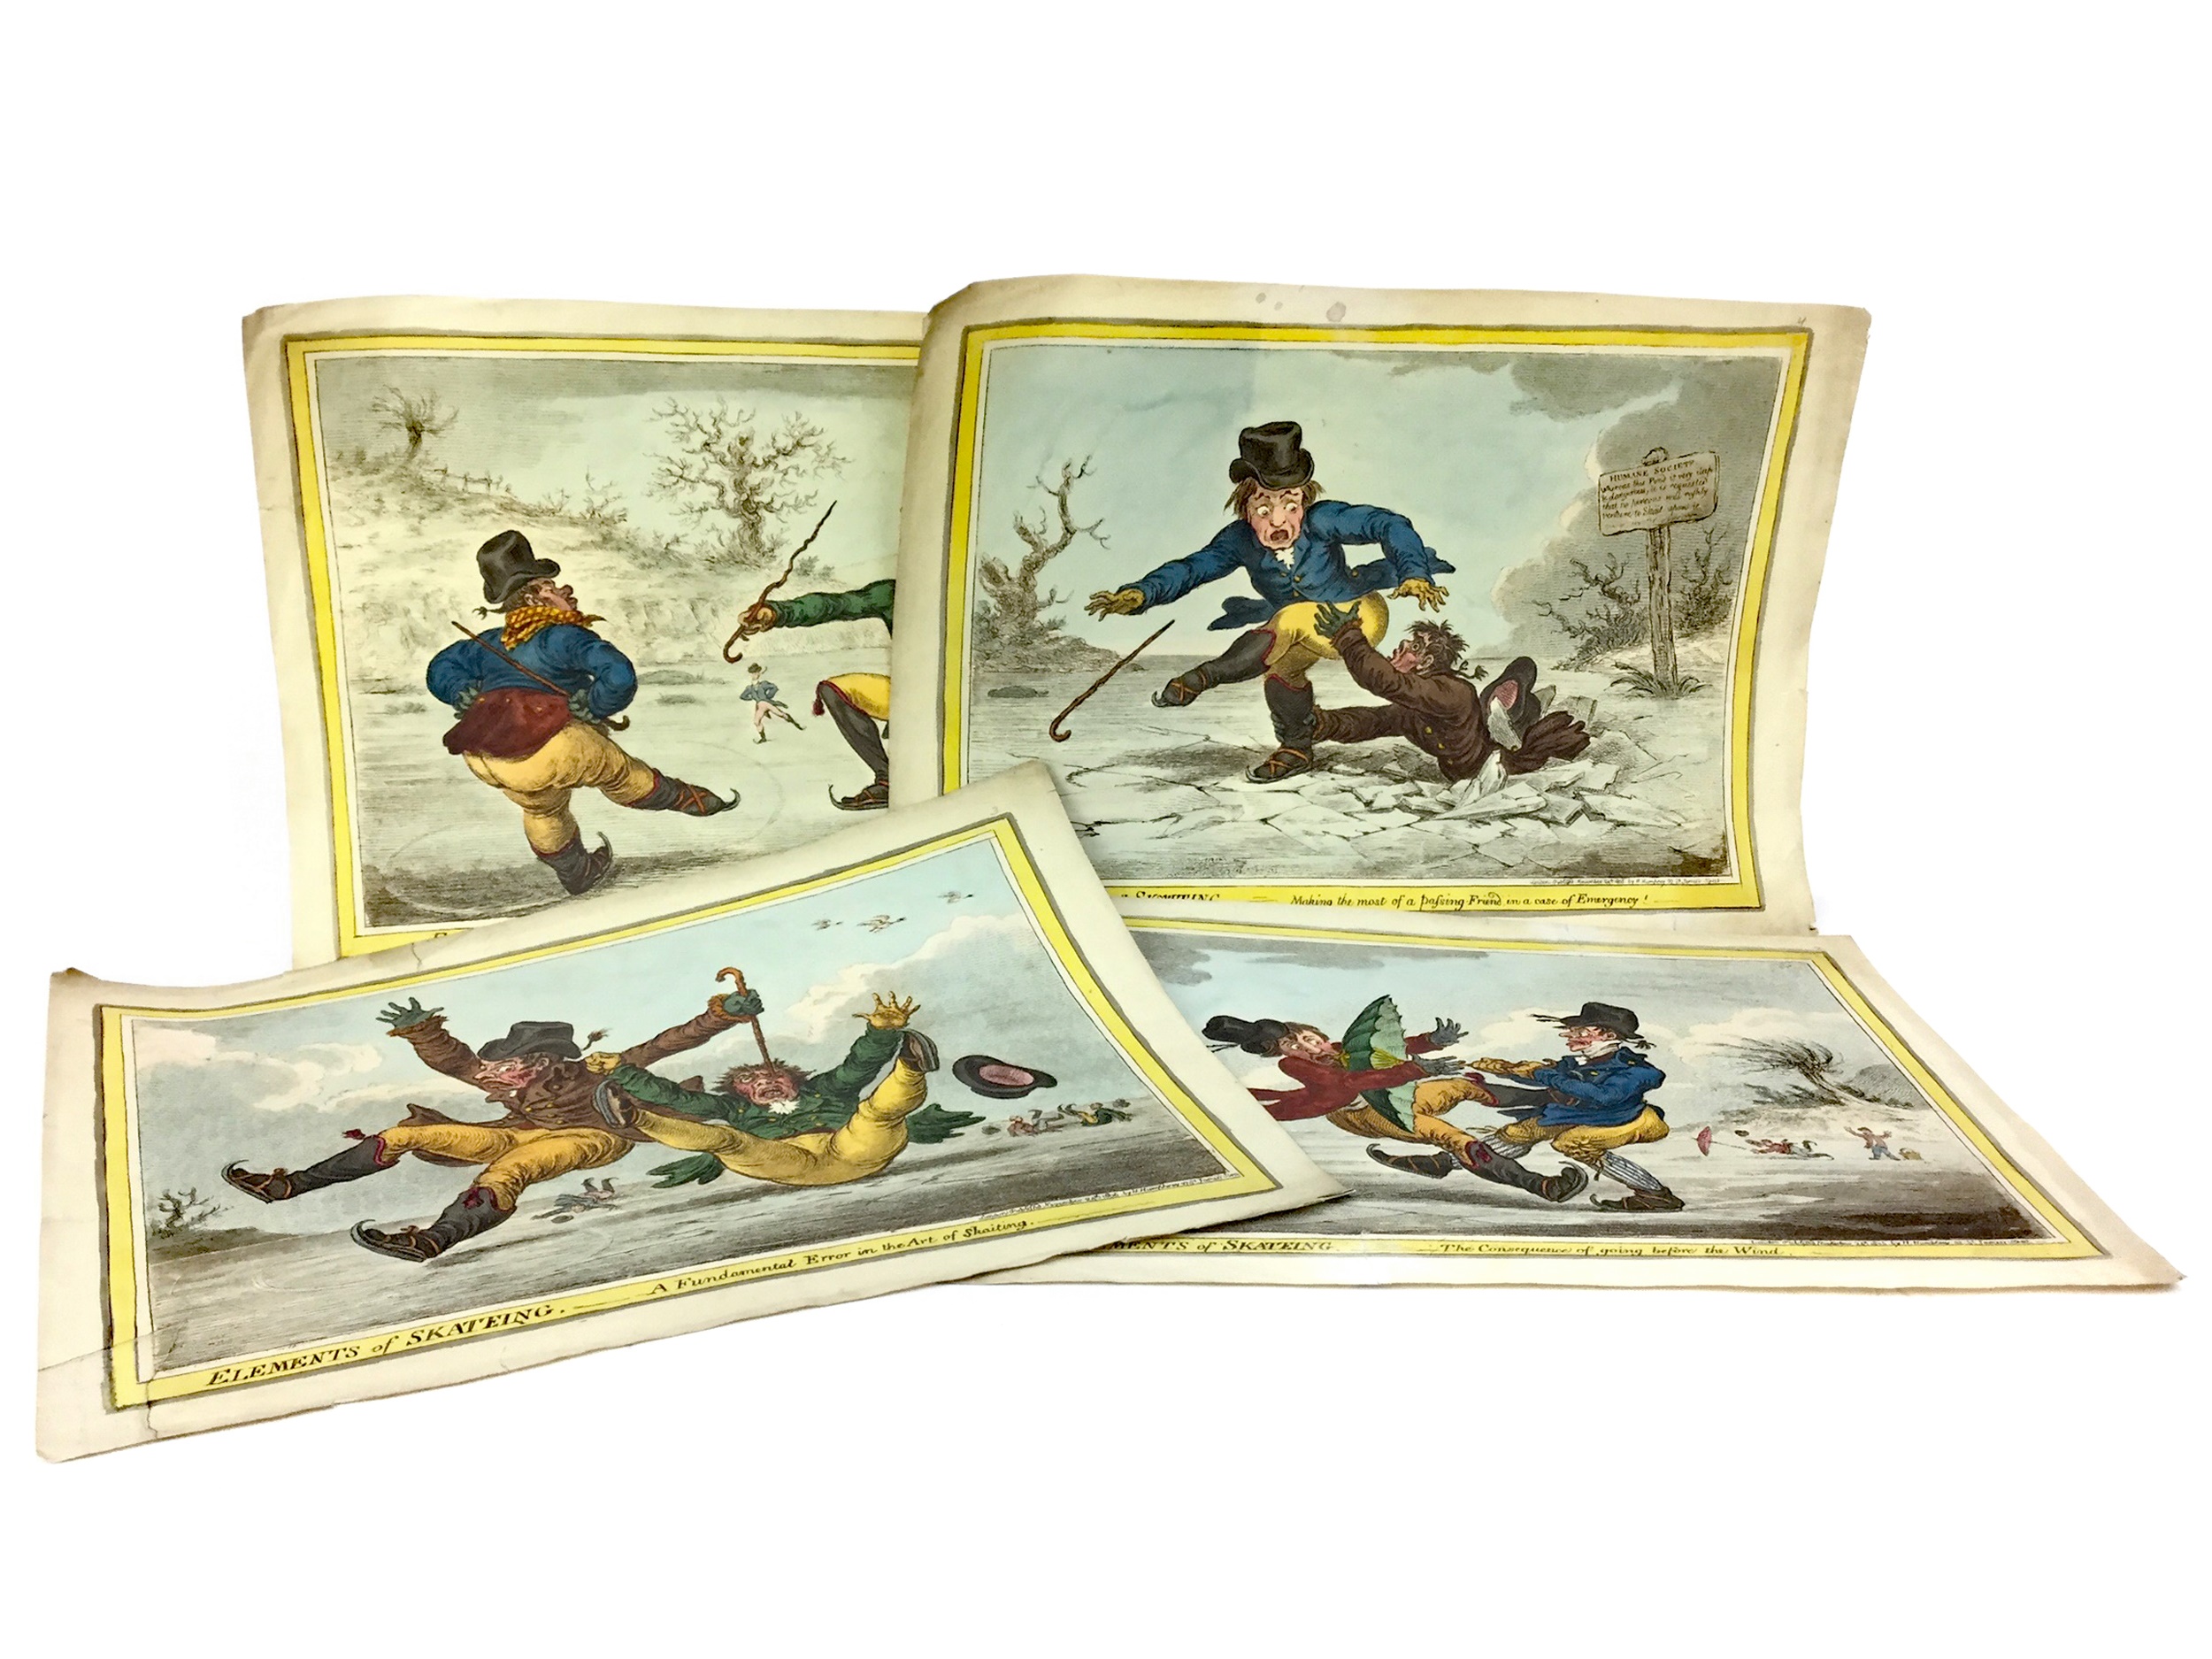 THE ELEMENTS OF SKATEING - A SET OF FOUR PRINTS AFTERE JAMES GILRAY